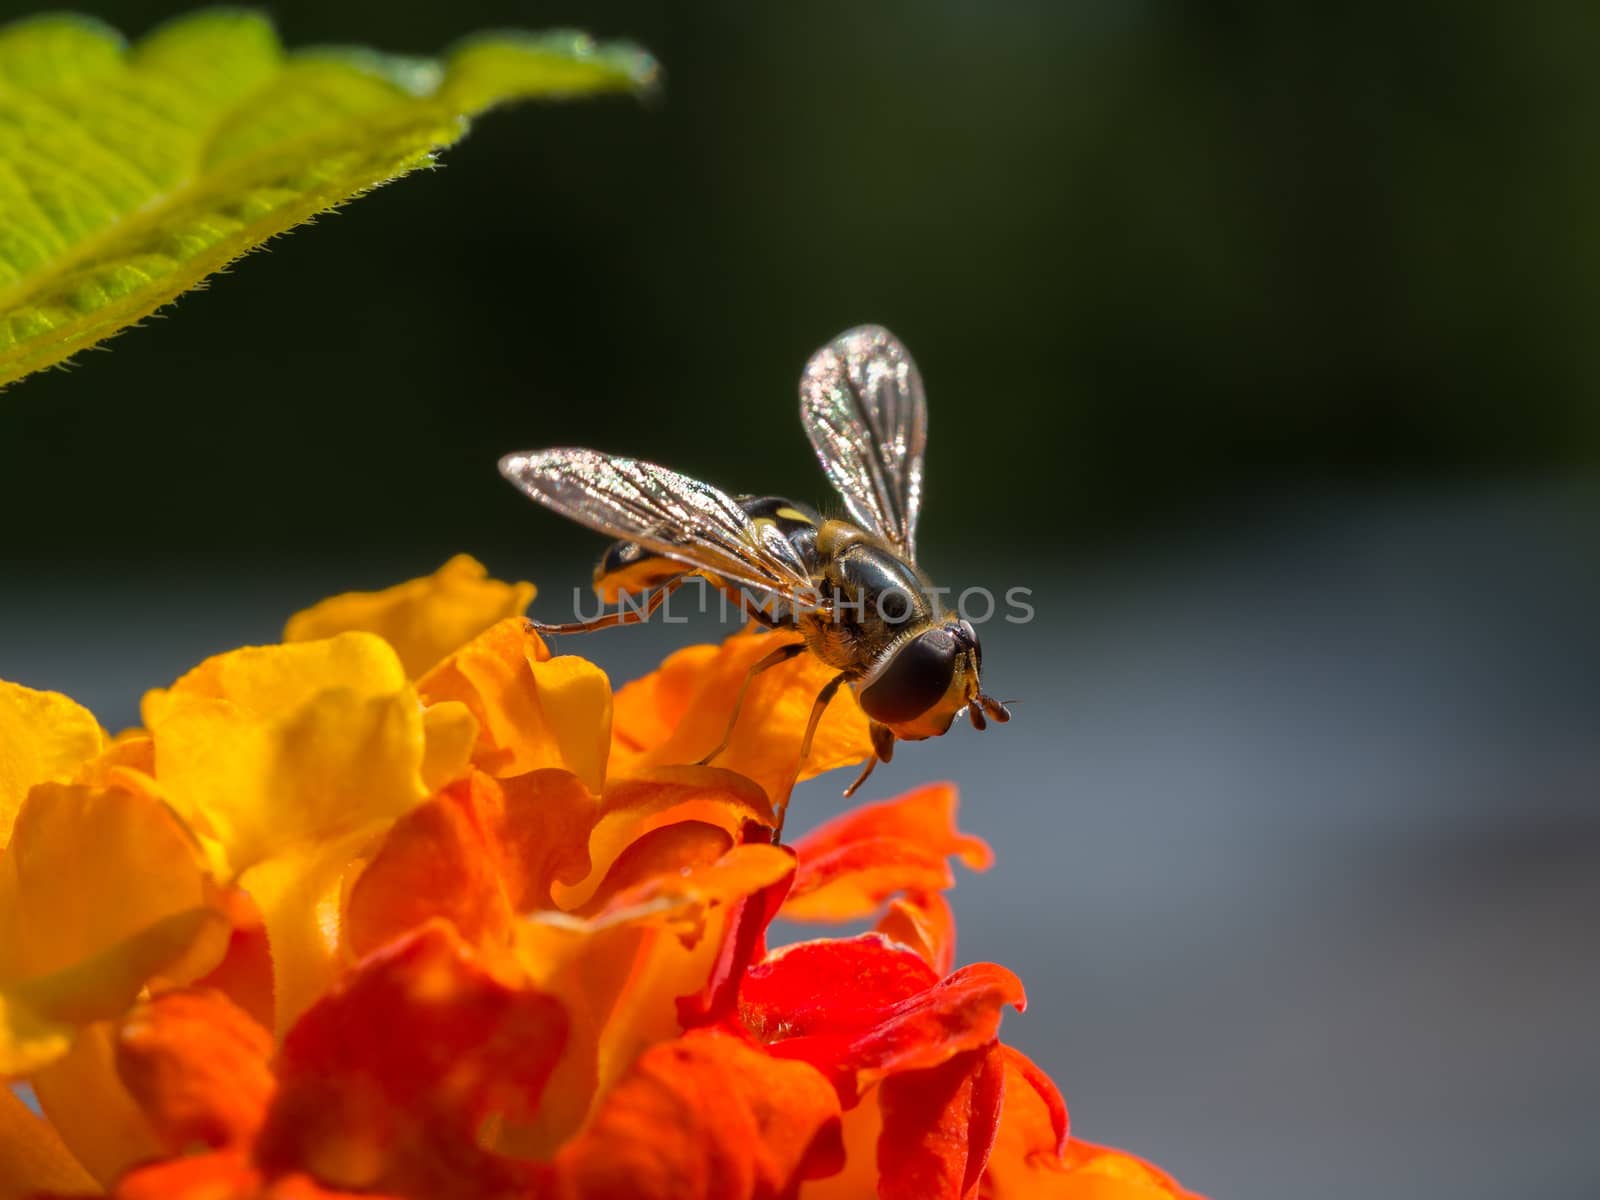 Hoverfly on small orange flower by frankhoekzema